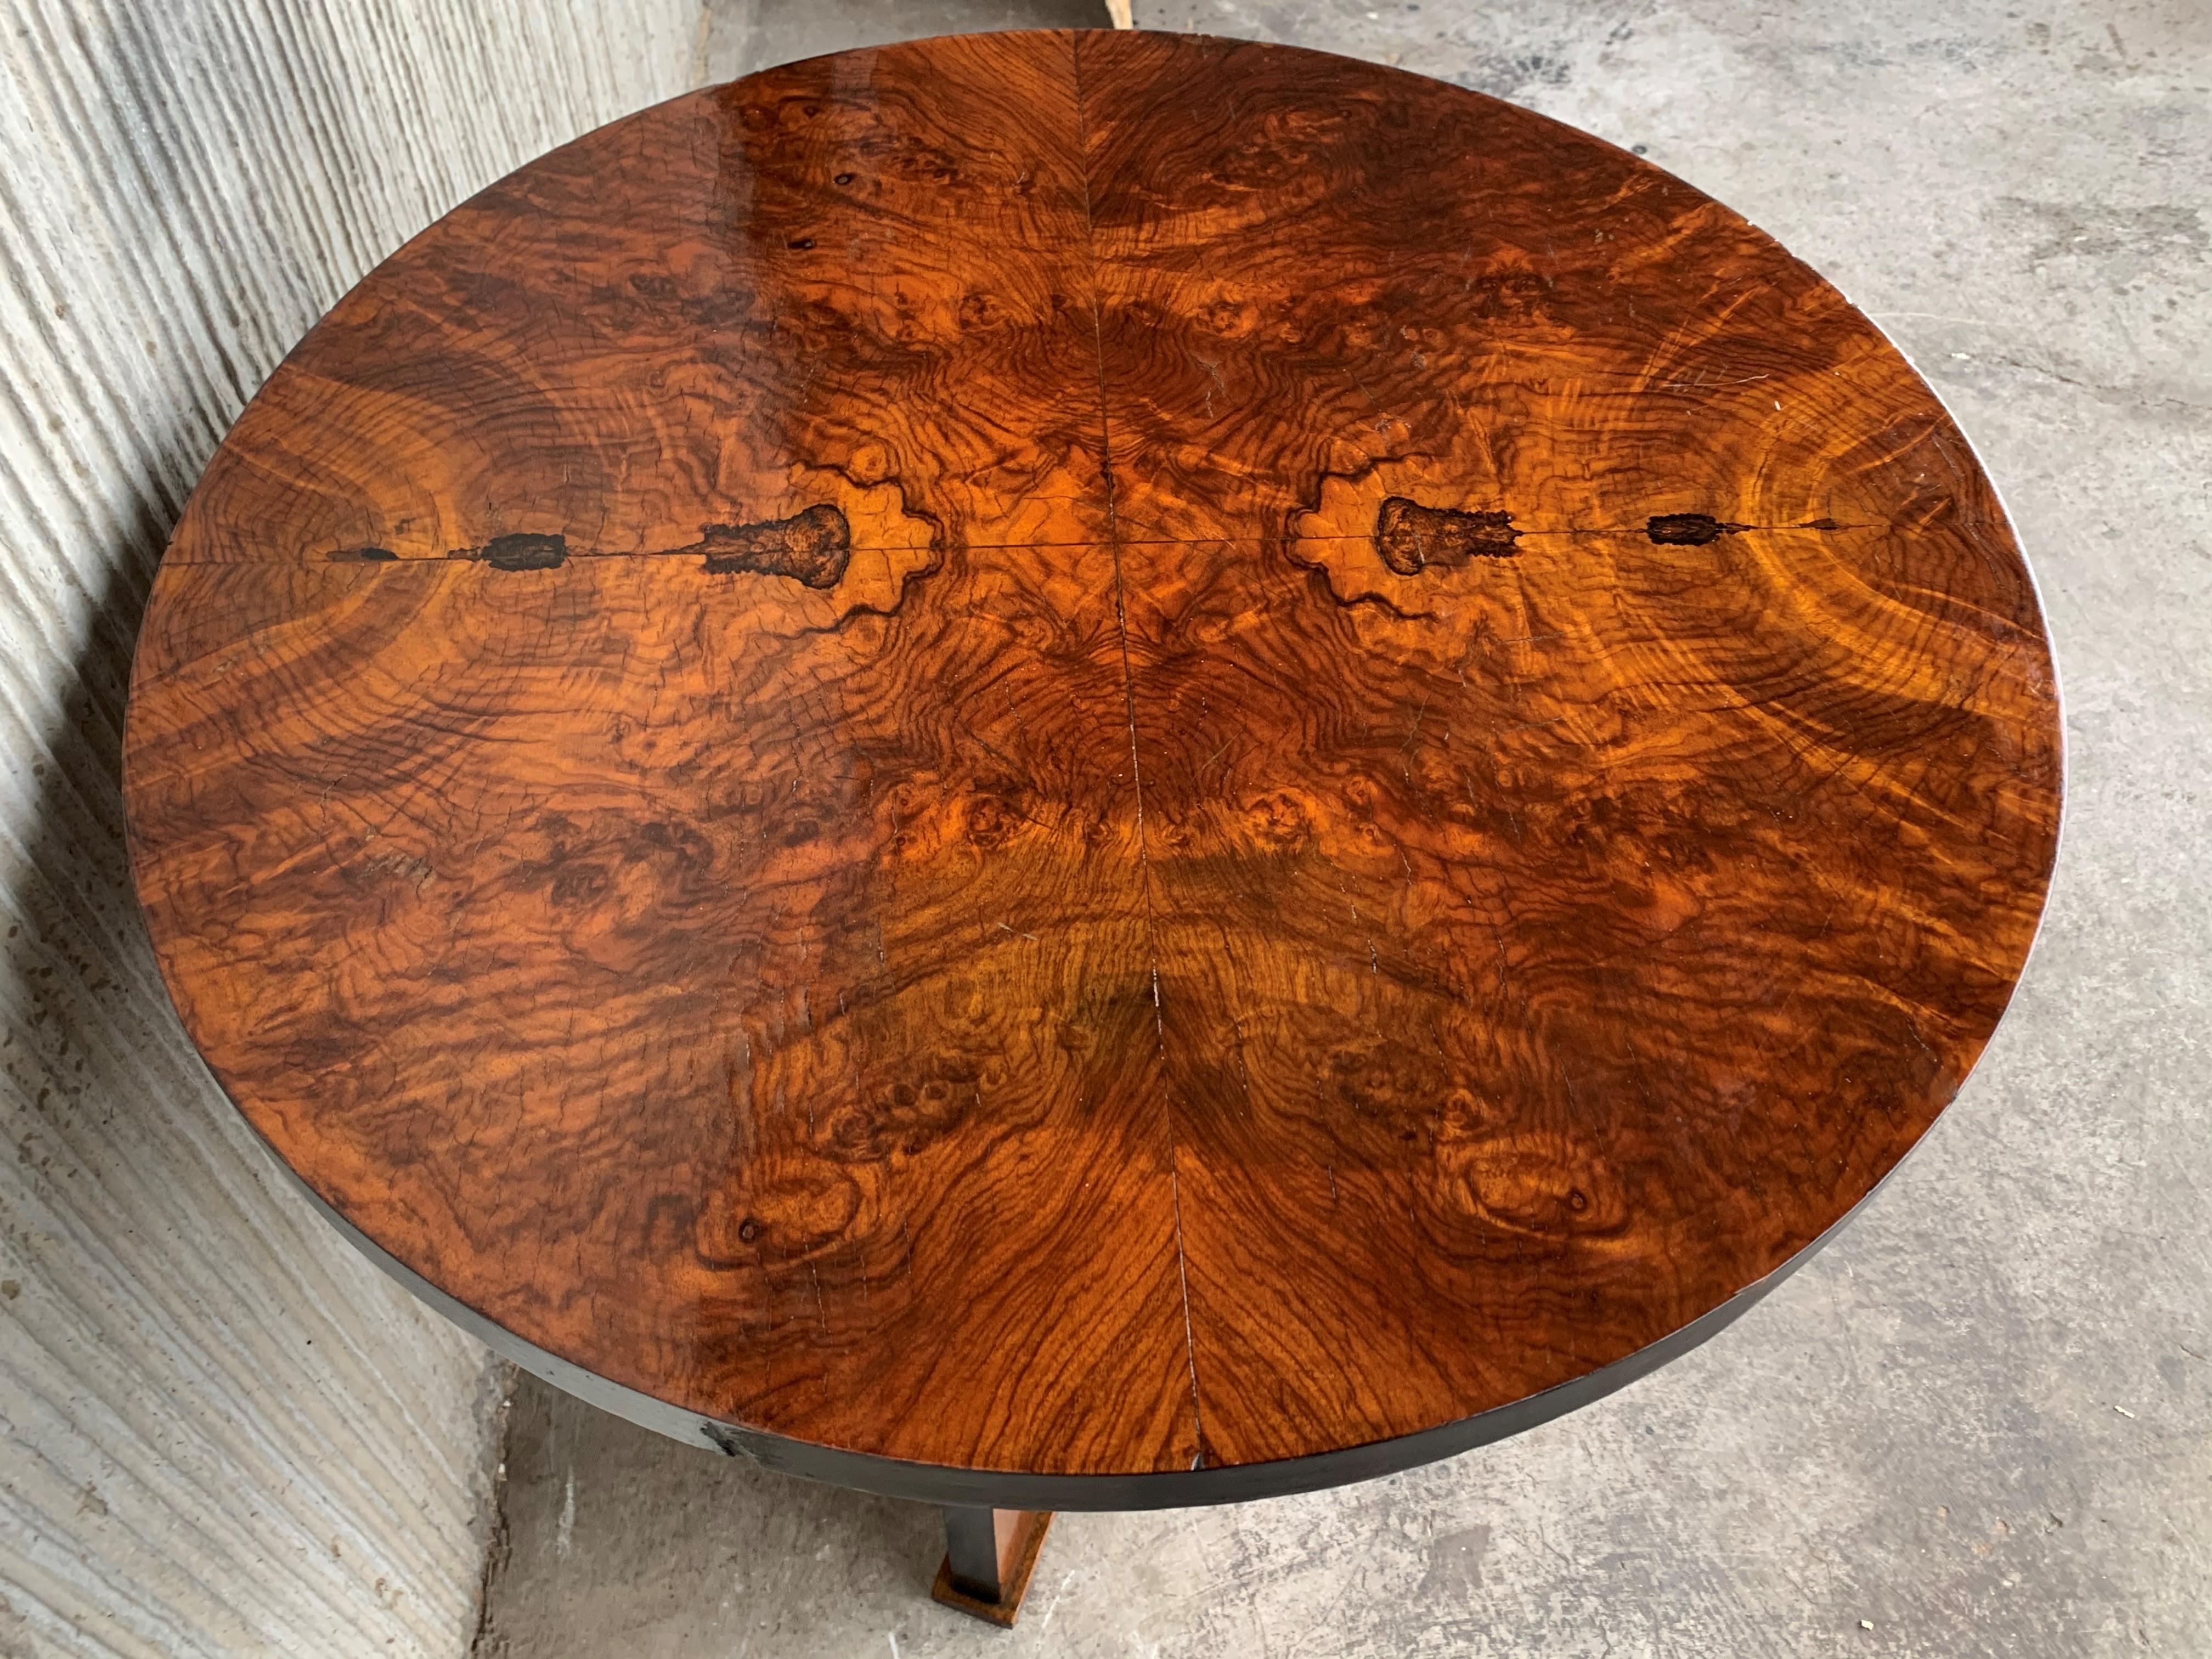 Dreamlike Art Deco table from the early epoch in Italy, circa 1920. The breathtaking shape in combination with finest Burl Macassar veneer makes this design table an absolute timeless masterpiece. The round tabletop shows a superior grain and was